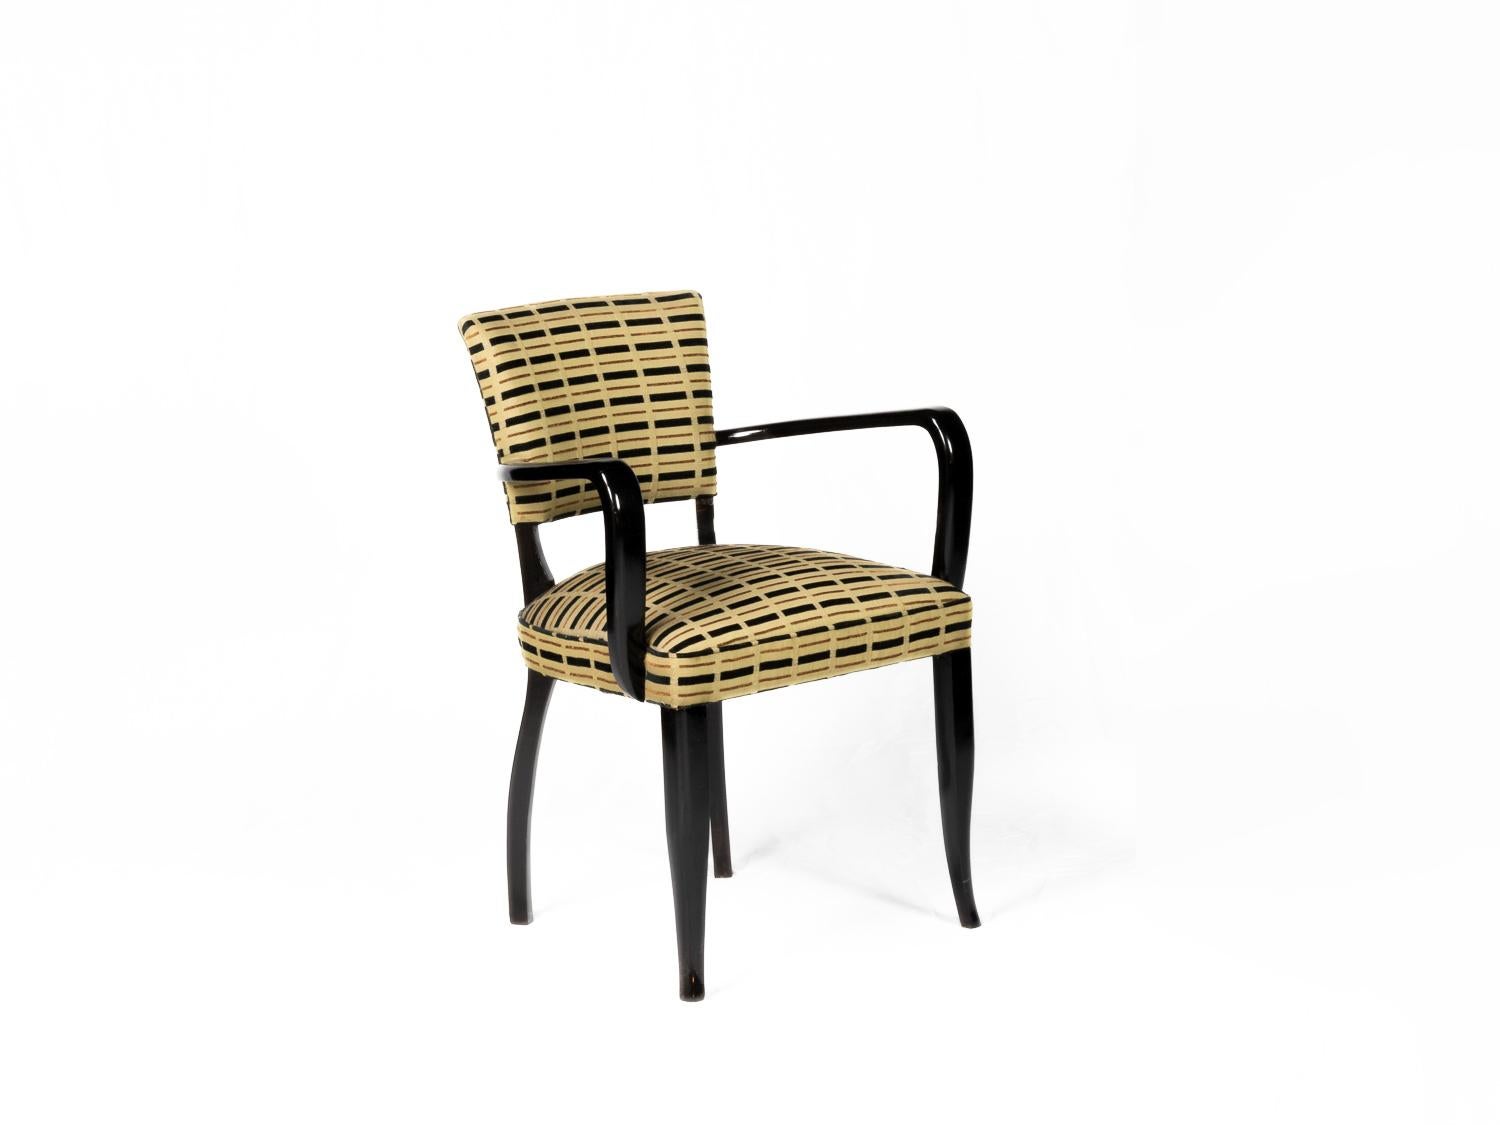 A pair of elegant bridge clear wood armchairs with a lacquered finish and an excellent maintained black and yellow upholstery in great conditions.